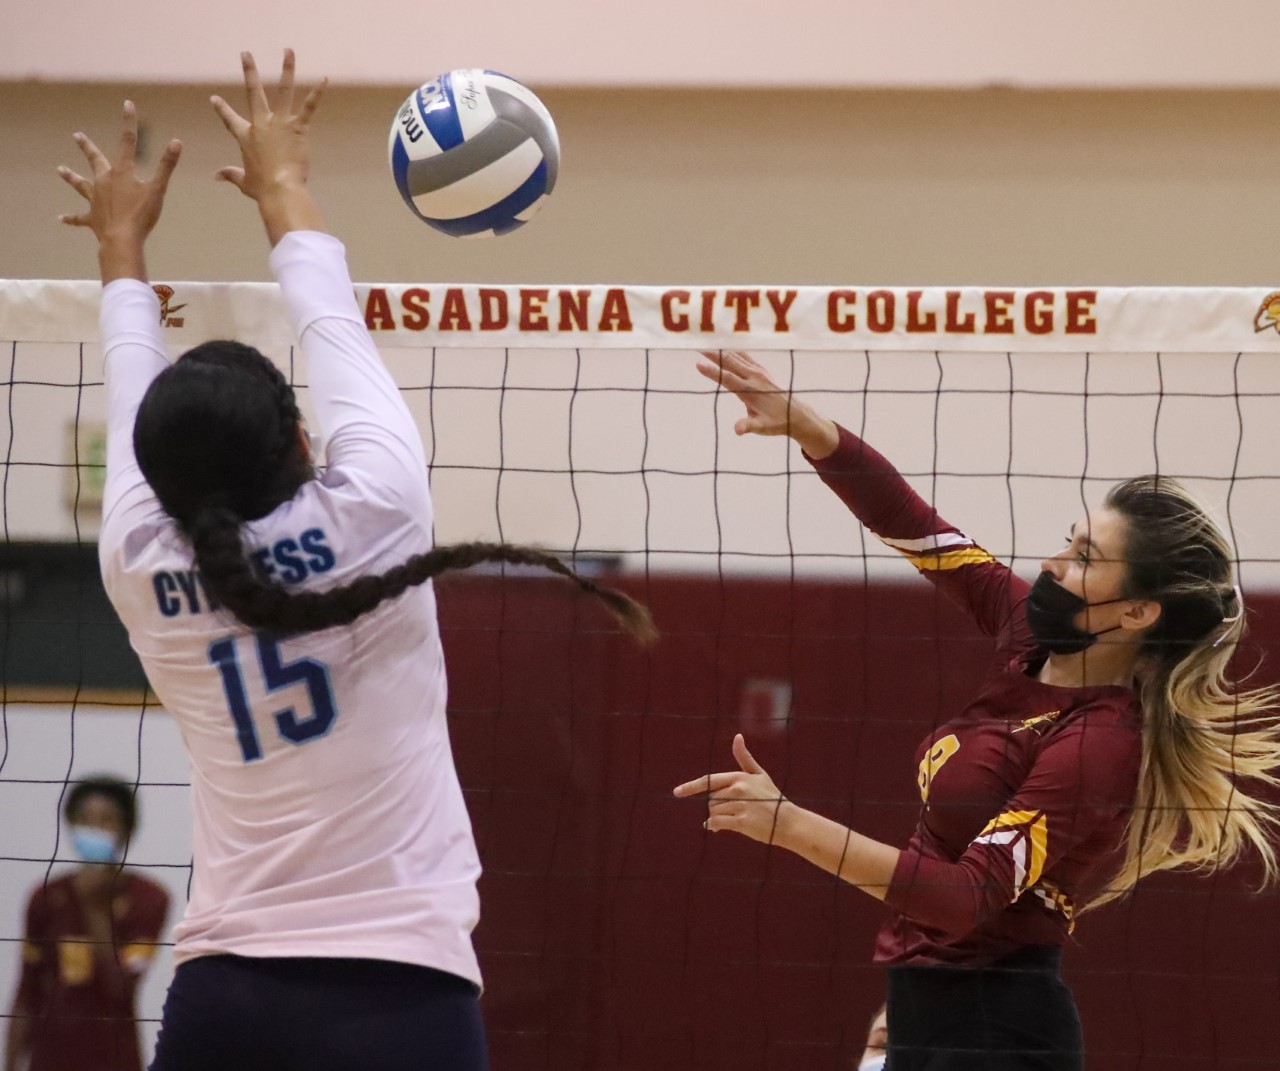 Nalani Young is a big part of Pasadena City College's rise to the #6 spot on this week's State Top 25 Women's Volleyball Rankings.